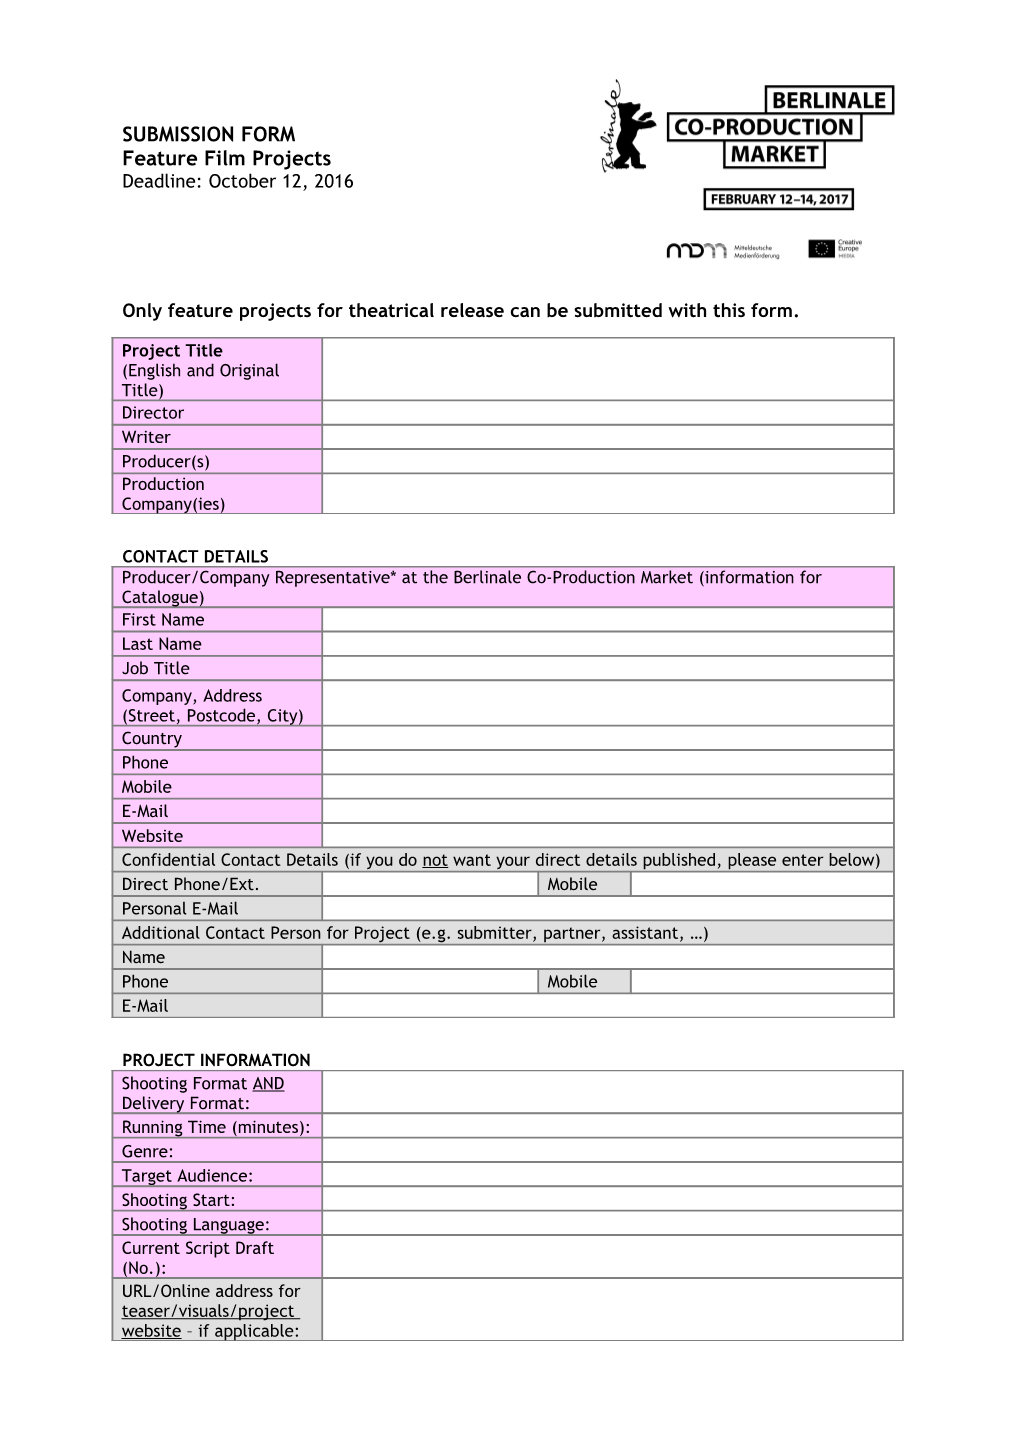 Only Feature Projects for Theatrical Release Can Be Submitted with This Form